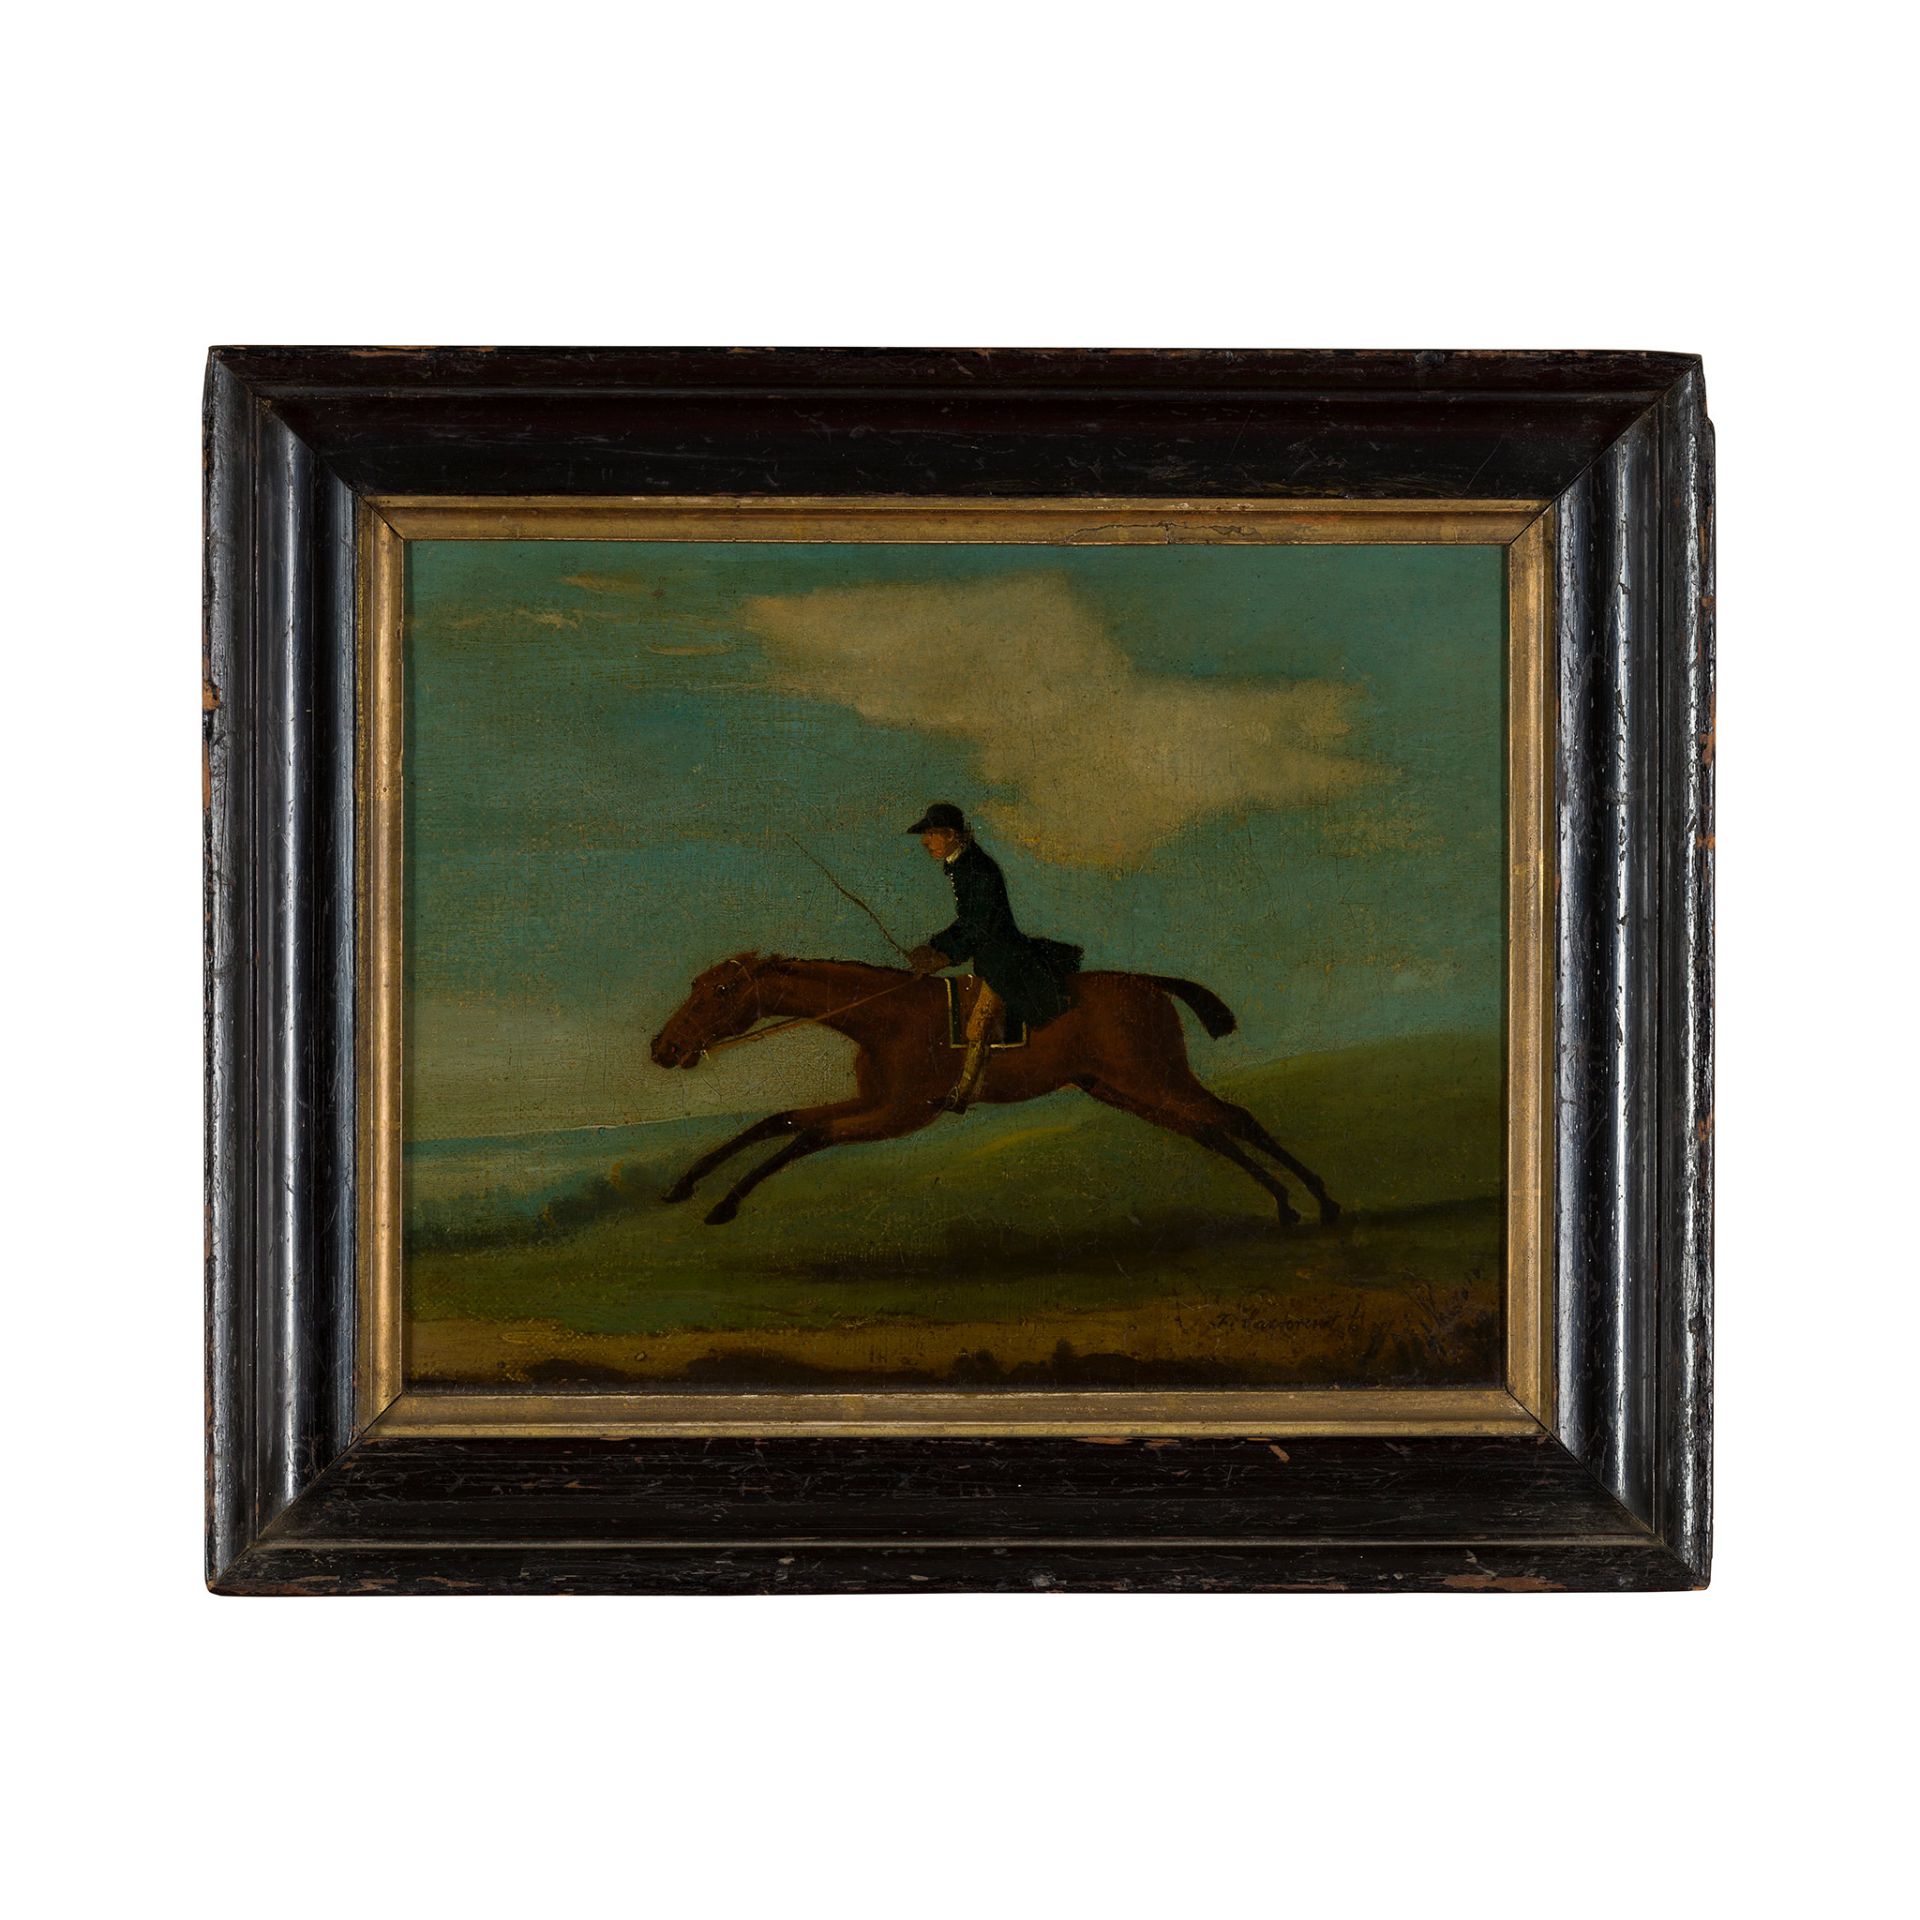 FRANCIS SARTORIUS (BRITISH 1734-1804) A BAY RACEHORSE, THE FIGURE IN GREEN FROCK COAT - Image 2 of 2